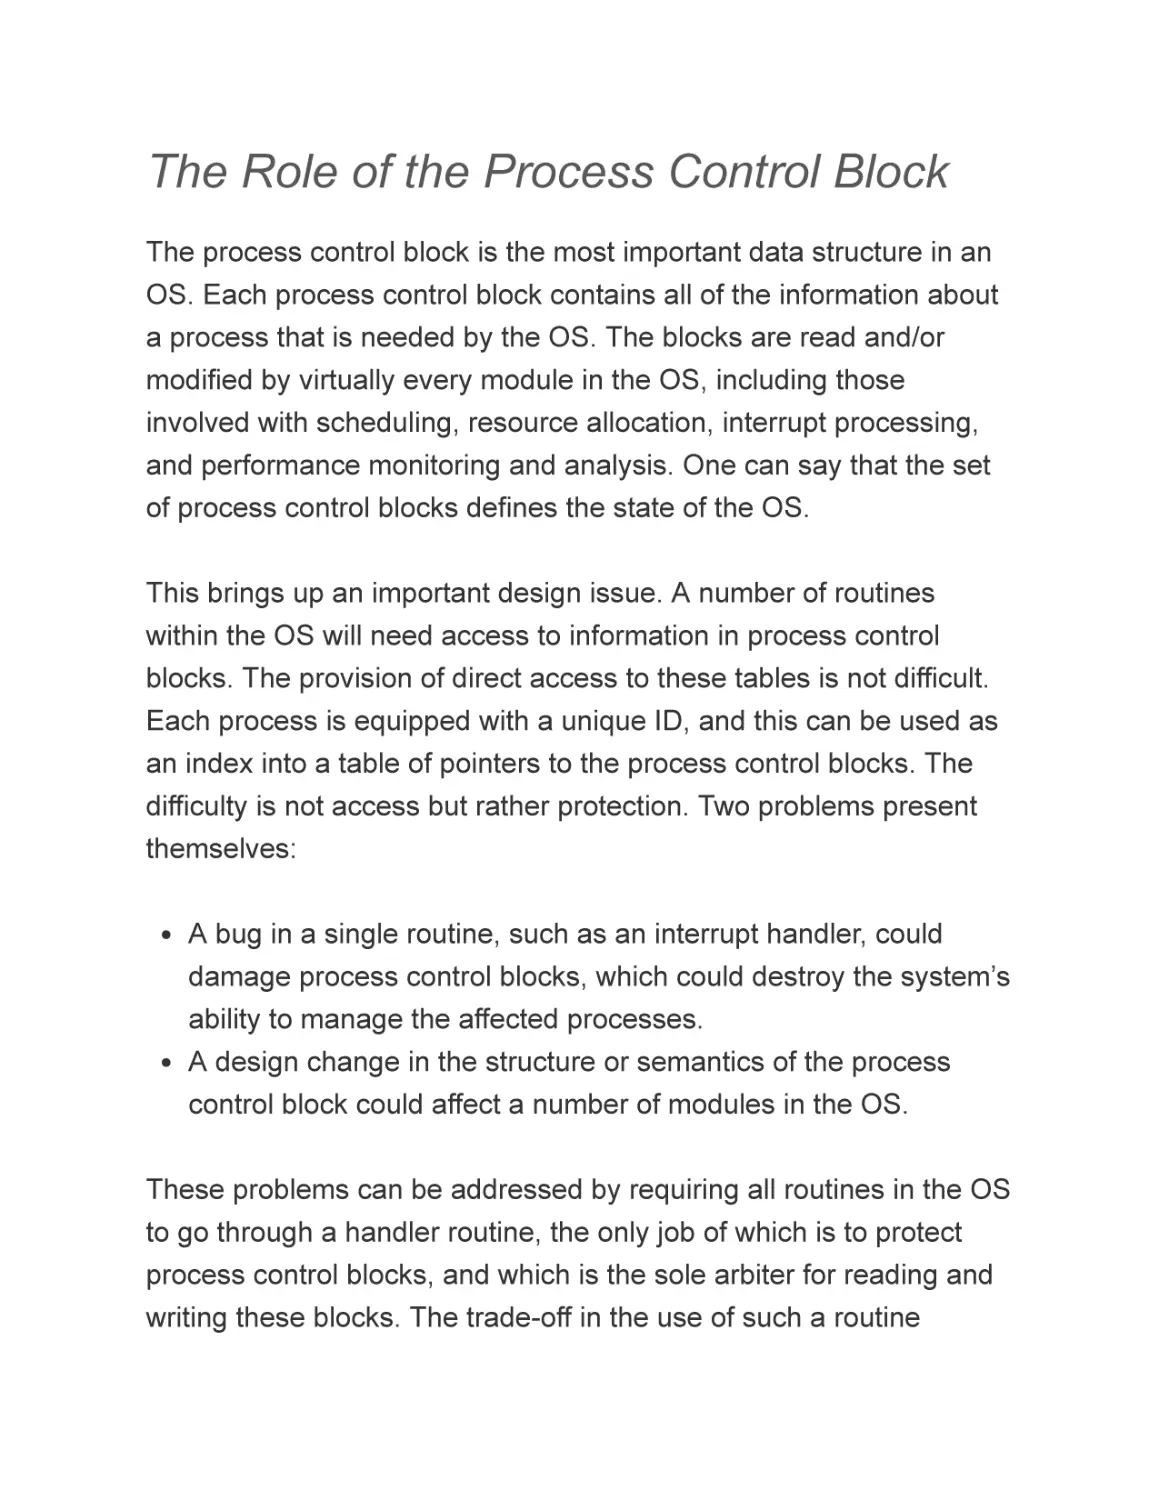 The Role of the Process Control Block